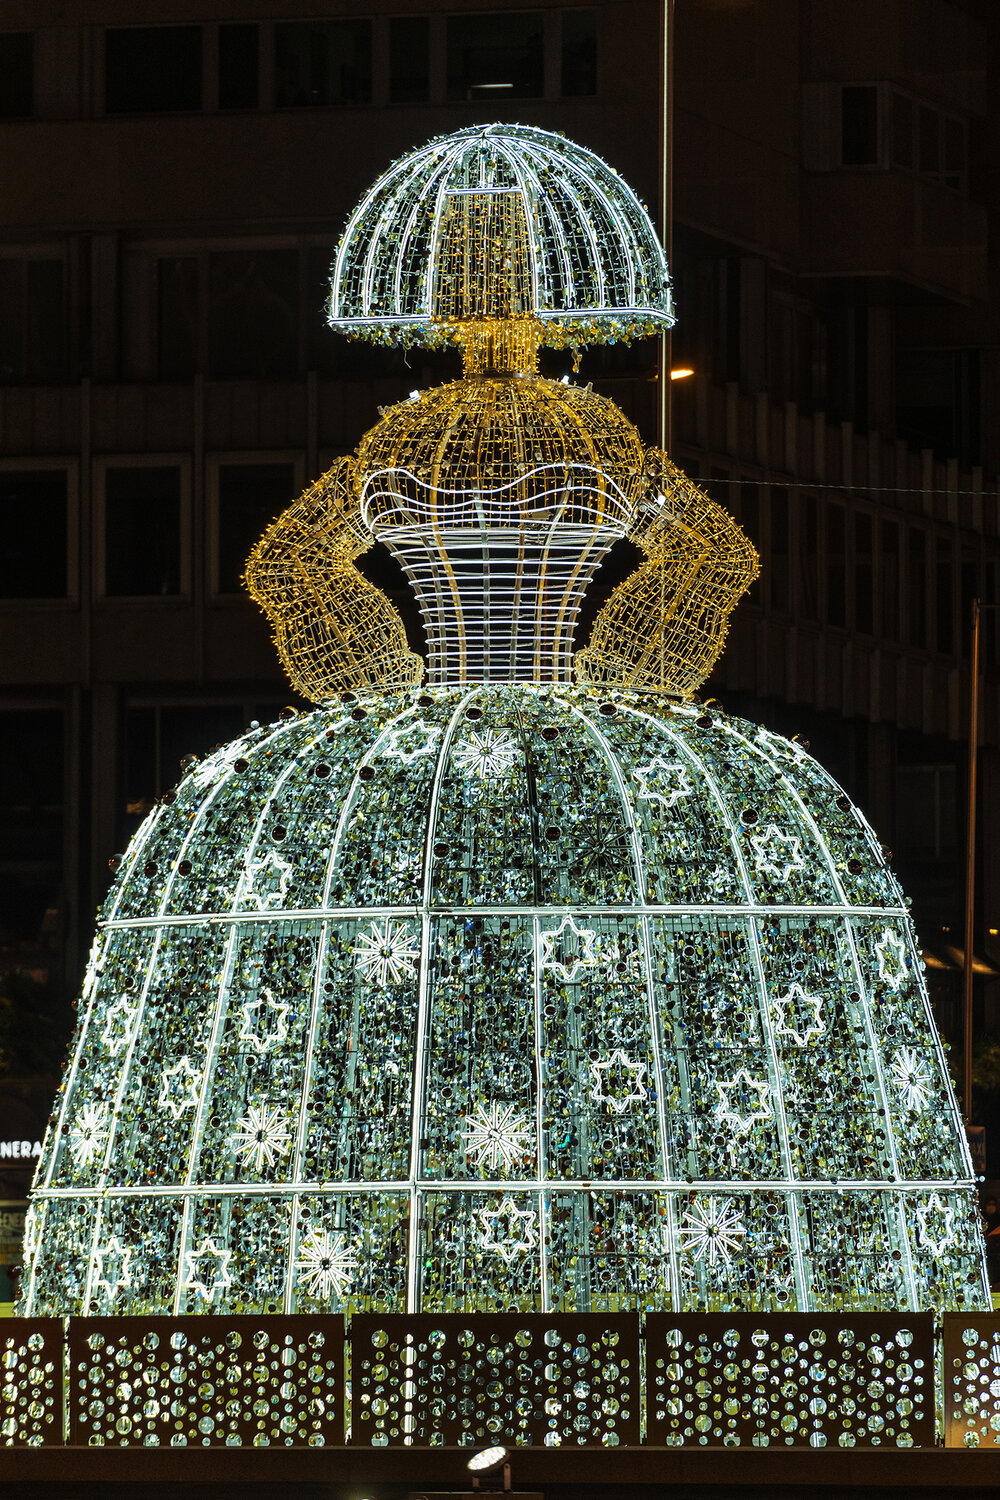 Close-up of a giant light Menina in the Plaza de Colon square in Madrid during Christmas.